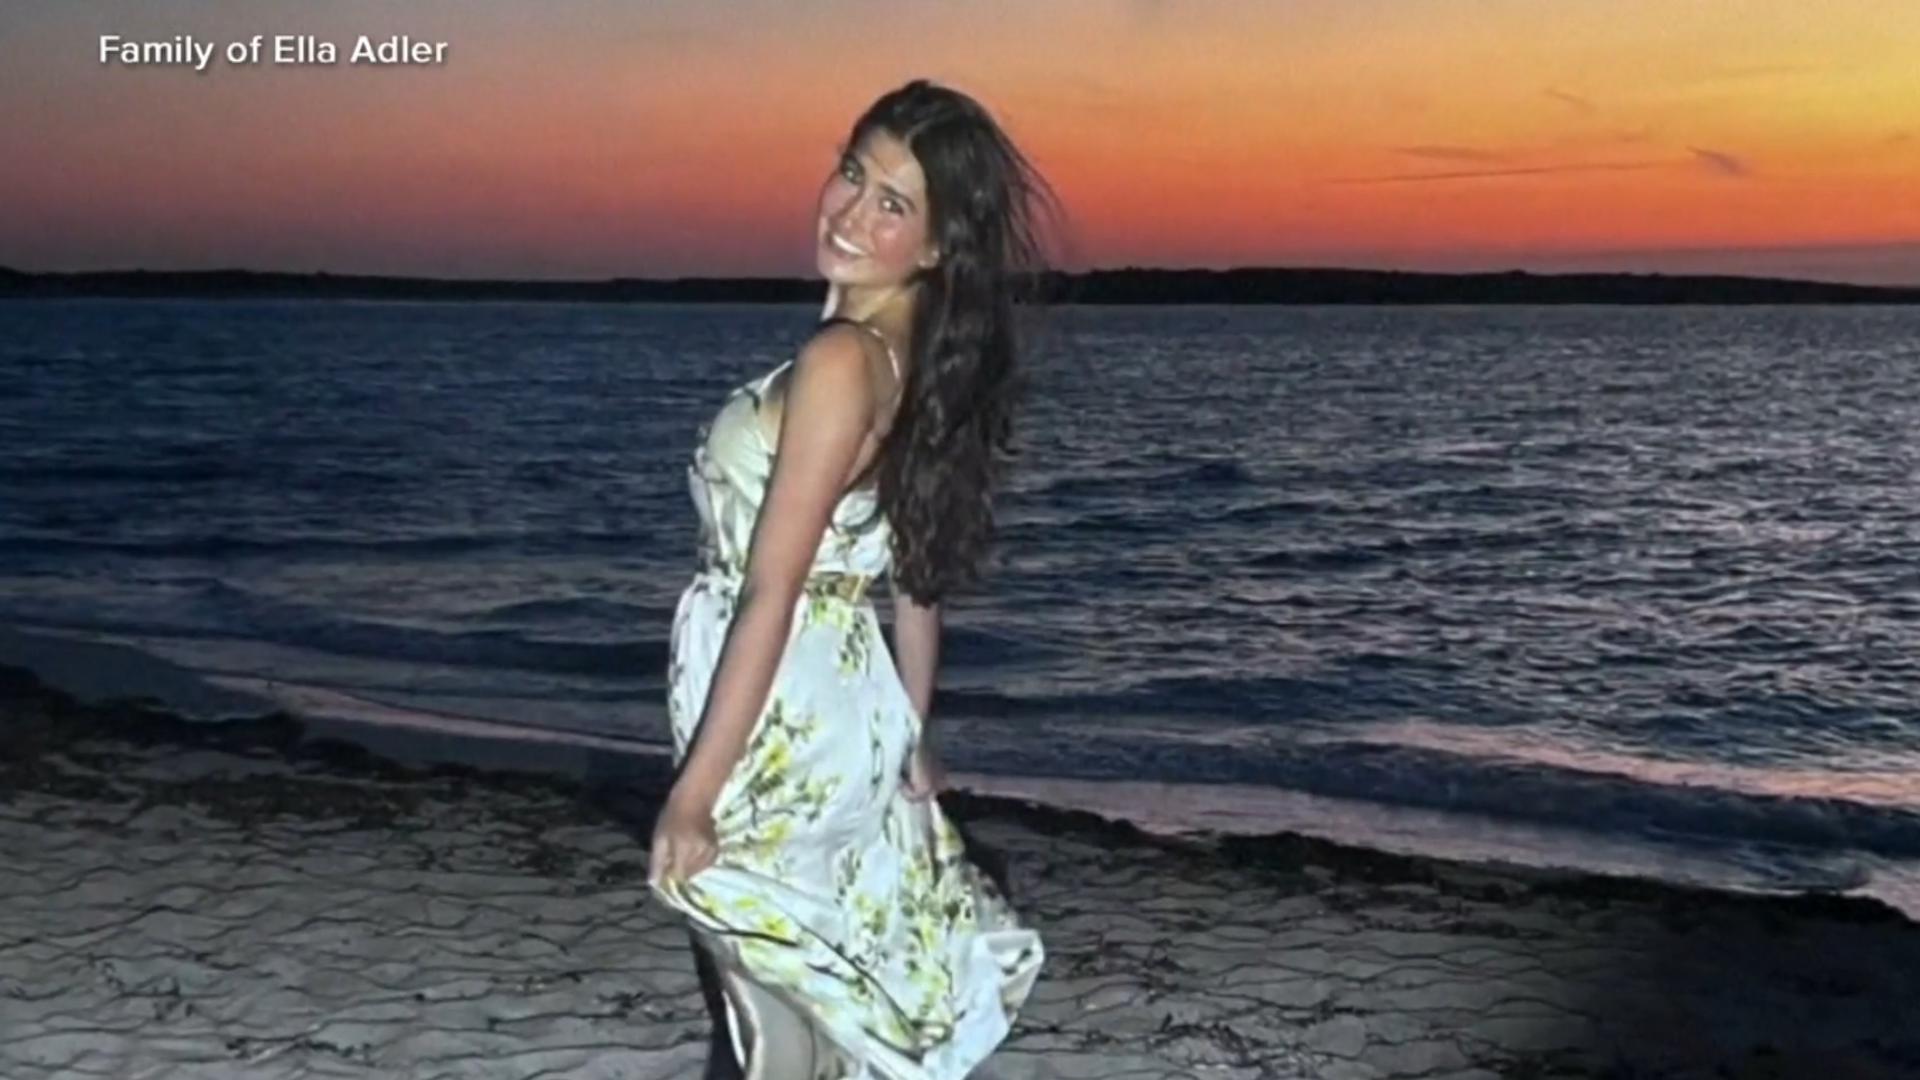 Ella Adler, 15, had fallen while wakeboarding when struck by a boat, FWC said.